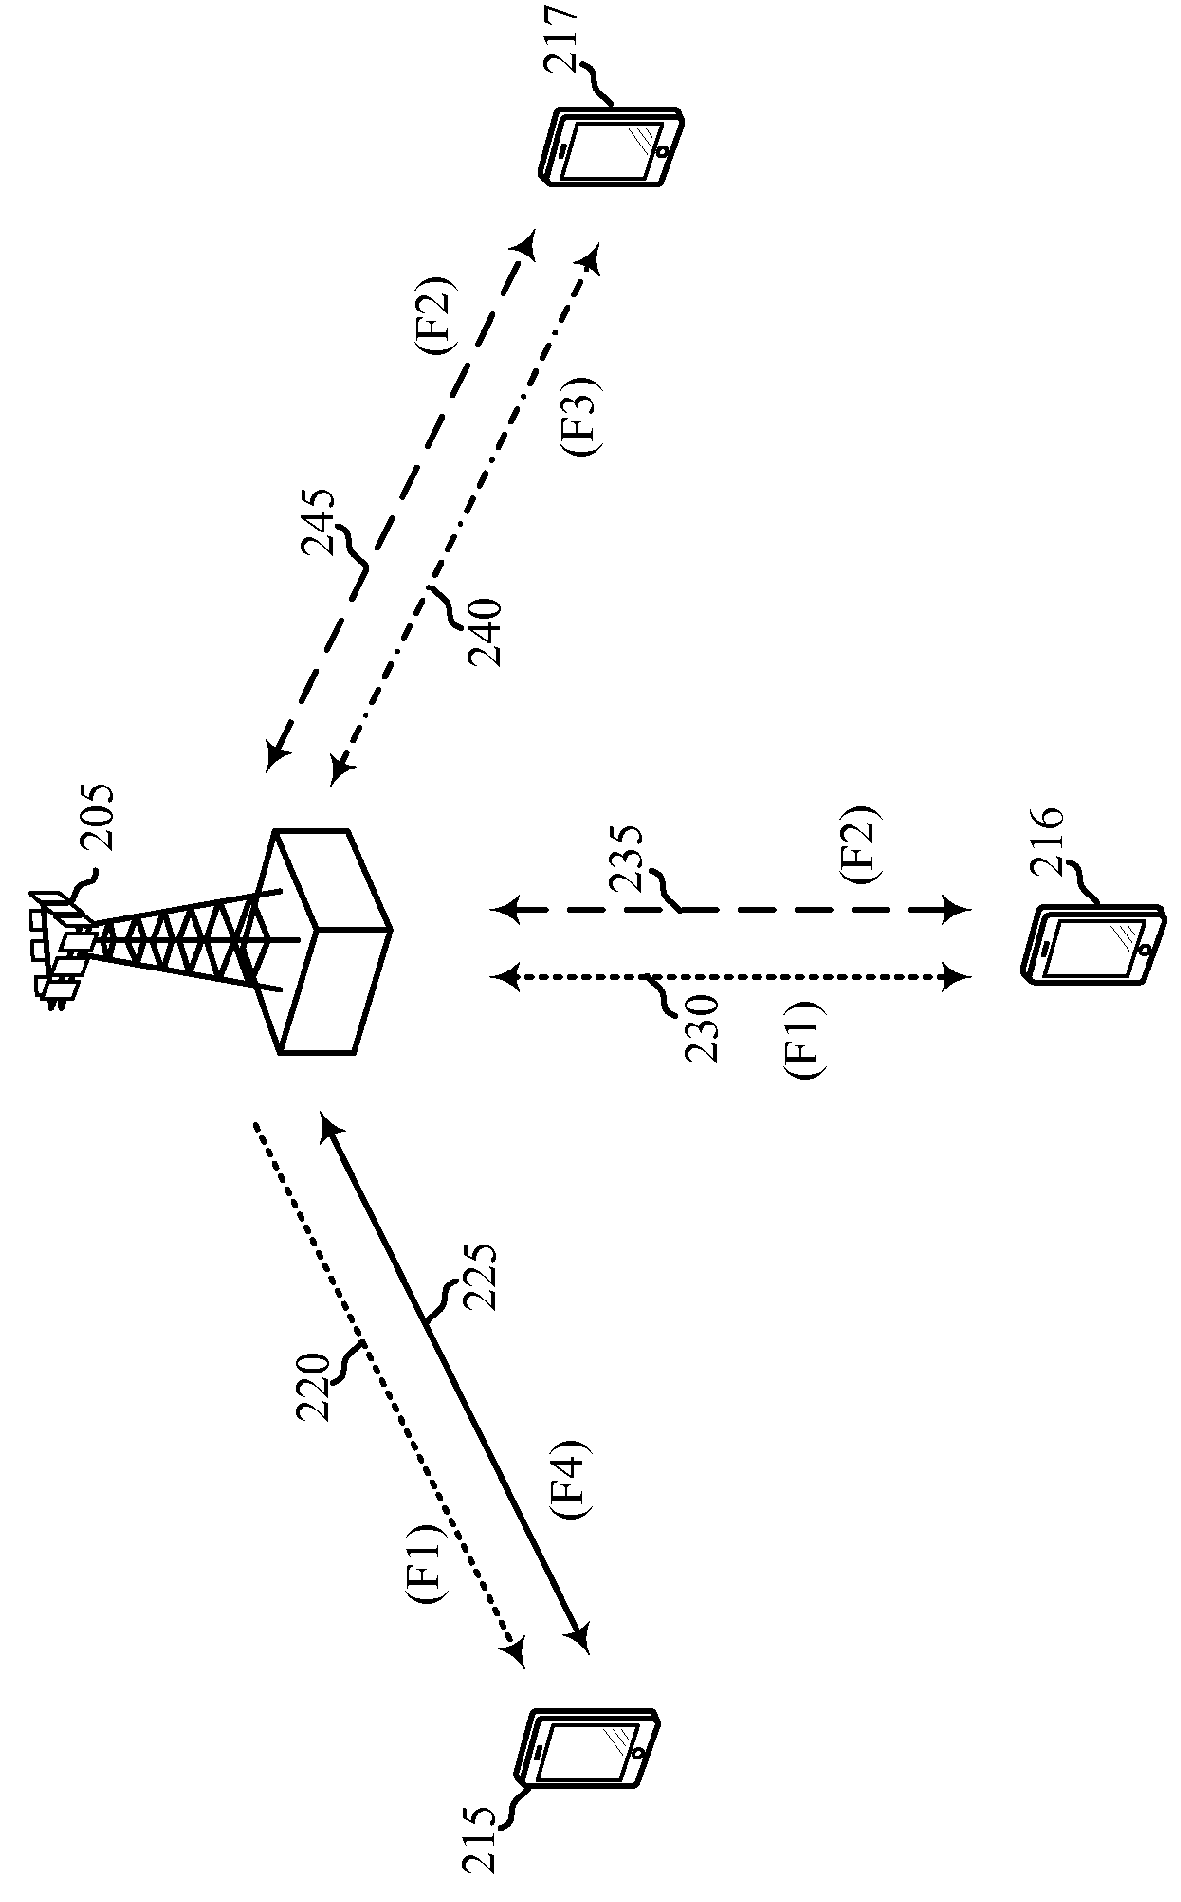 Transmission of uplink control channels over an unlicensed radio frequency spectrum band